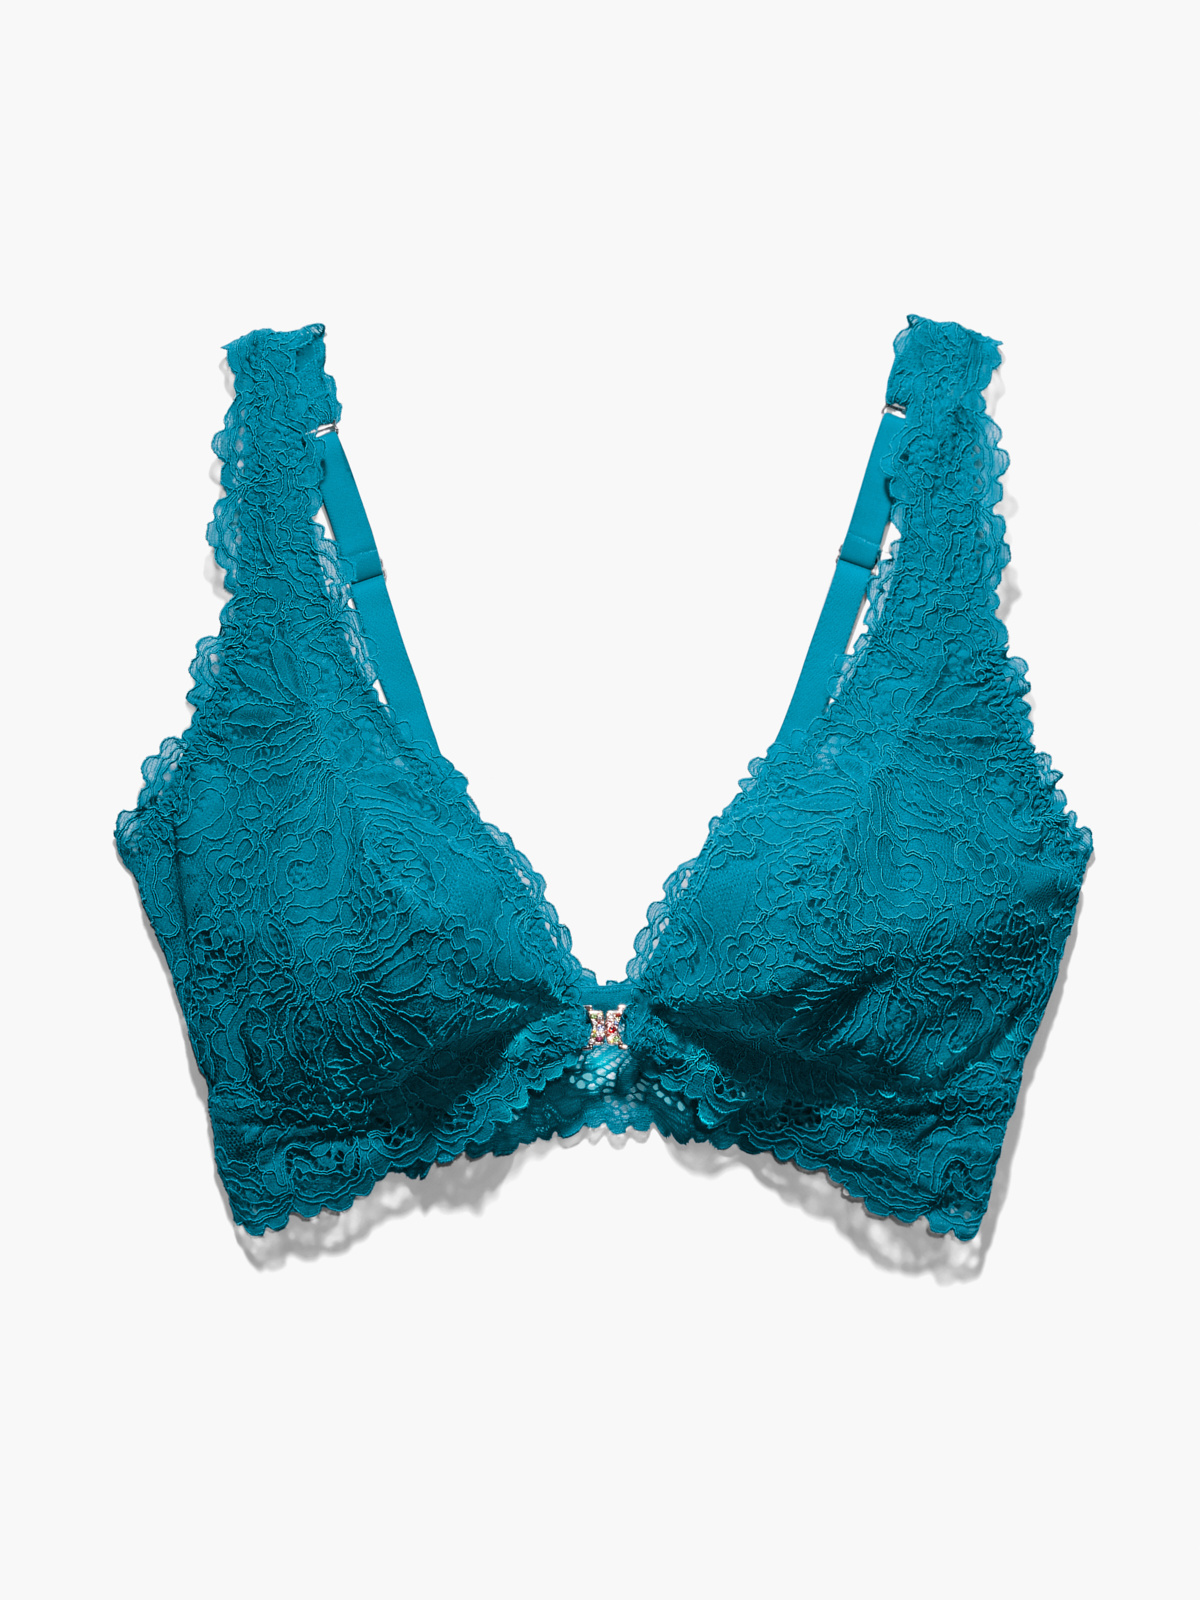 Savage x Fenty Teal Blue Romantic Lace Front-Closure Bralette Size XL NWOT  - $36 - From Tinnie